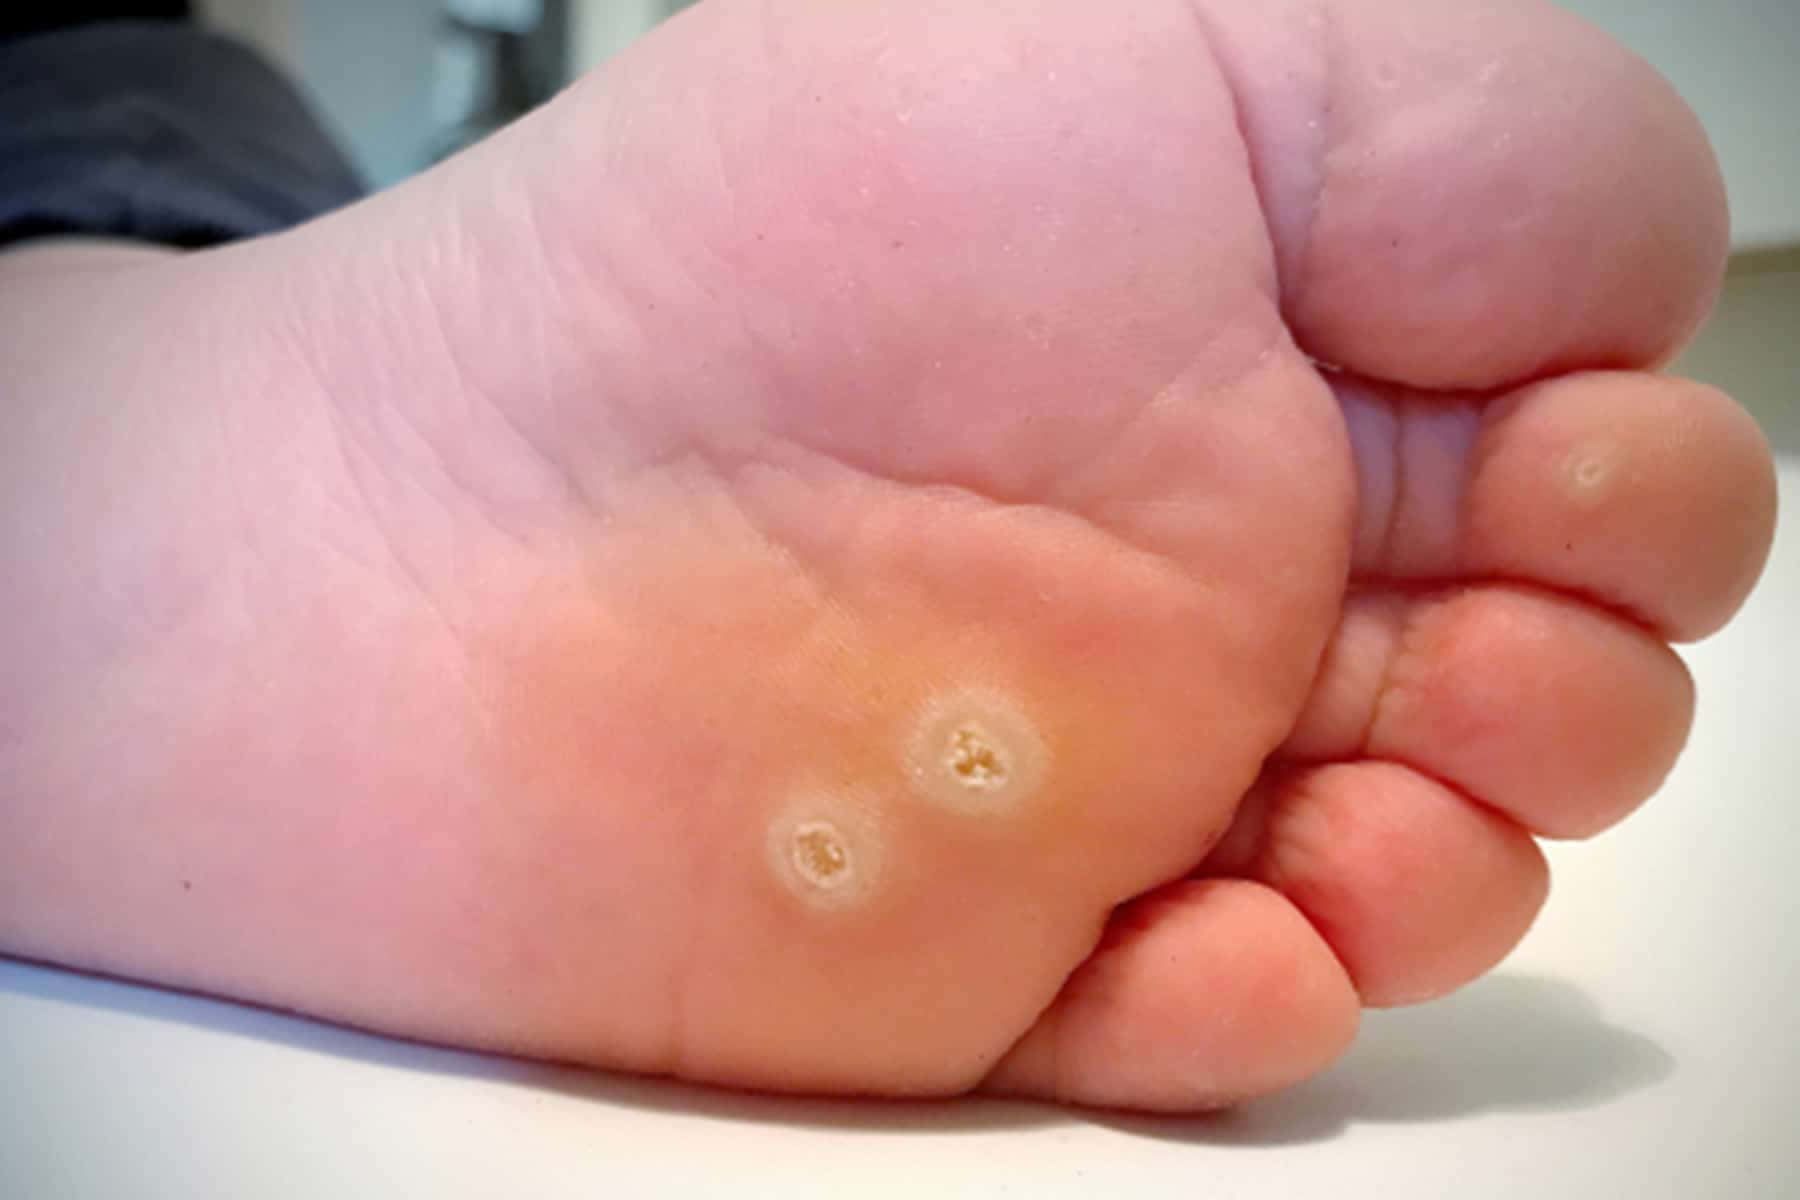 A Child's Foot With A Small White Spot On It